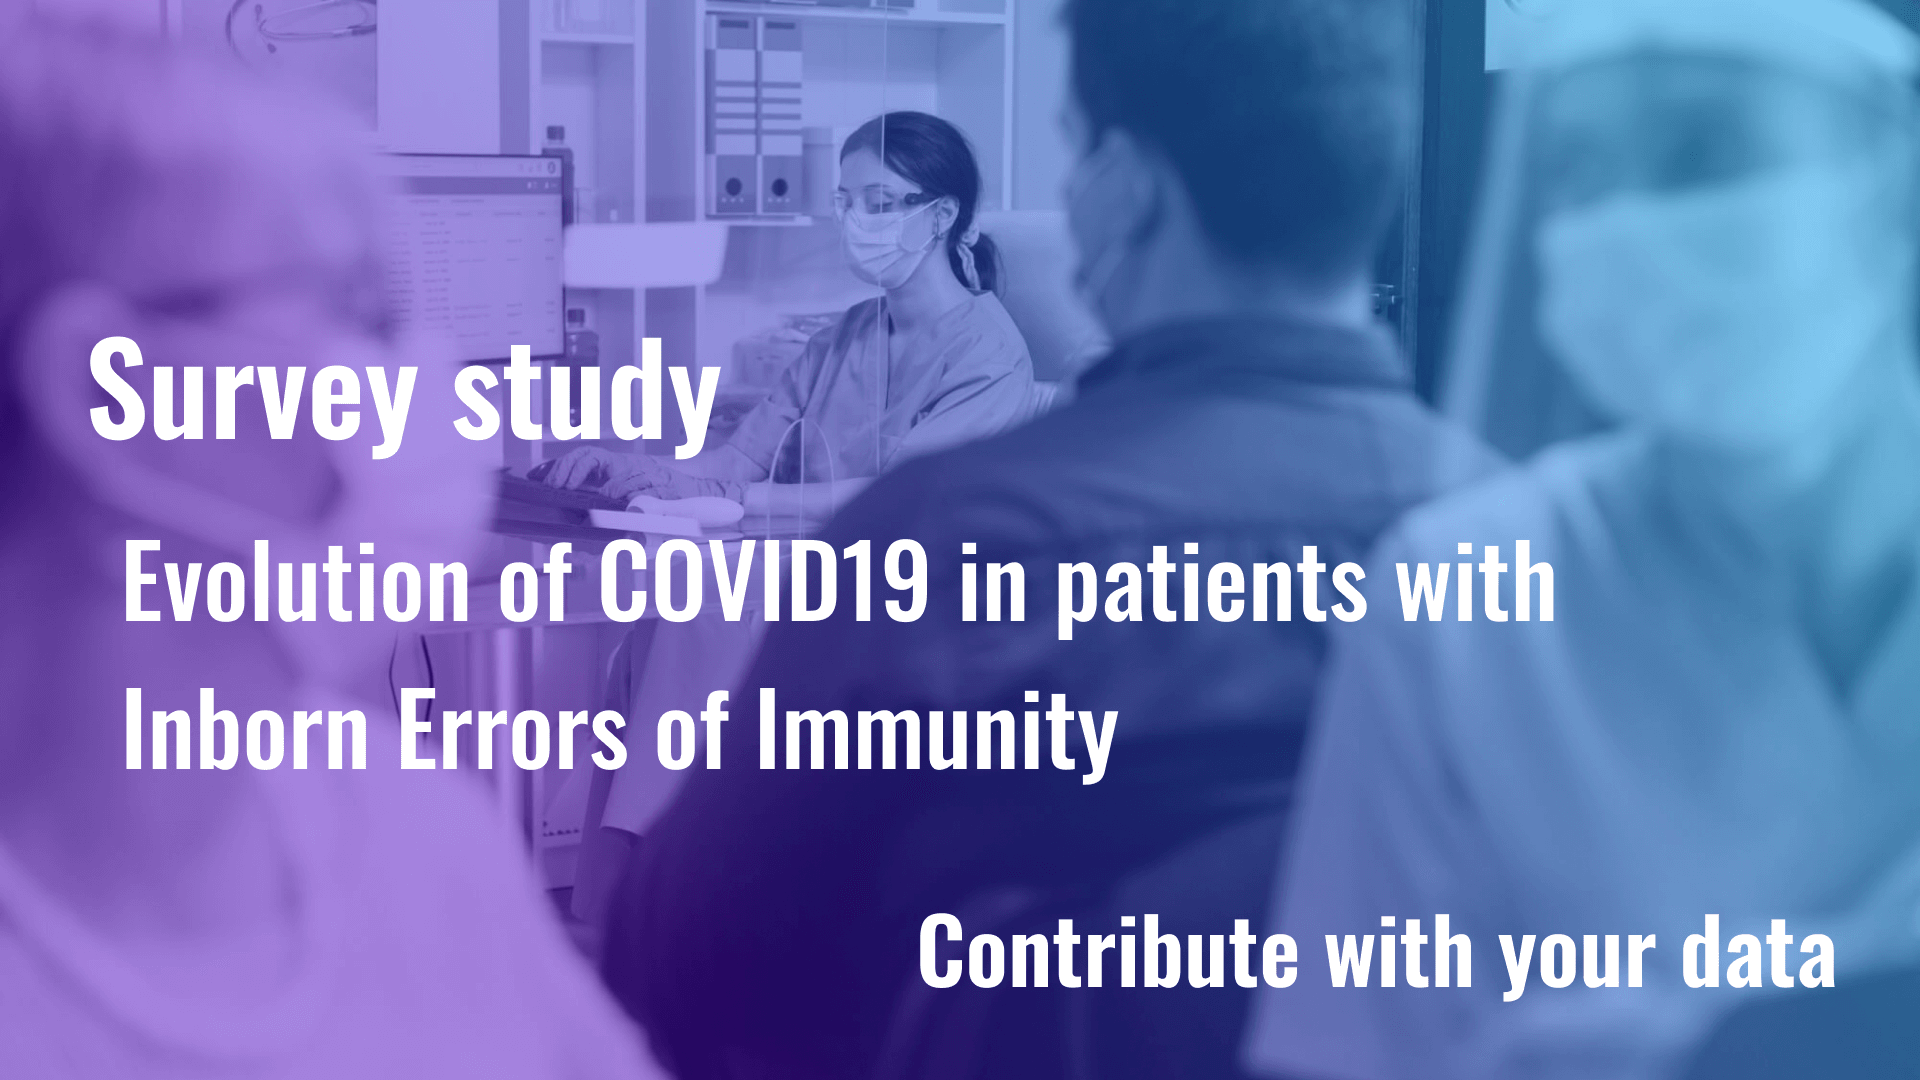 Study: evolution of COVID19 in patients with Inborn Errors of Immunity